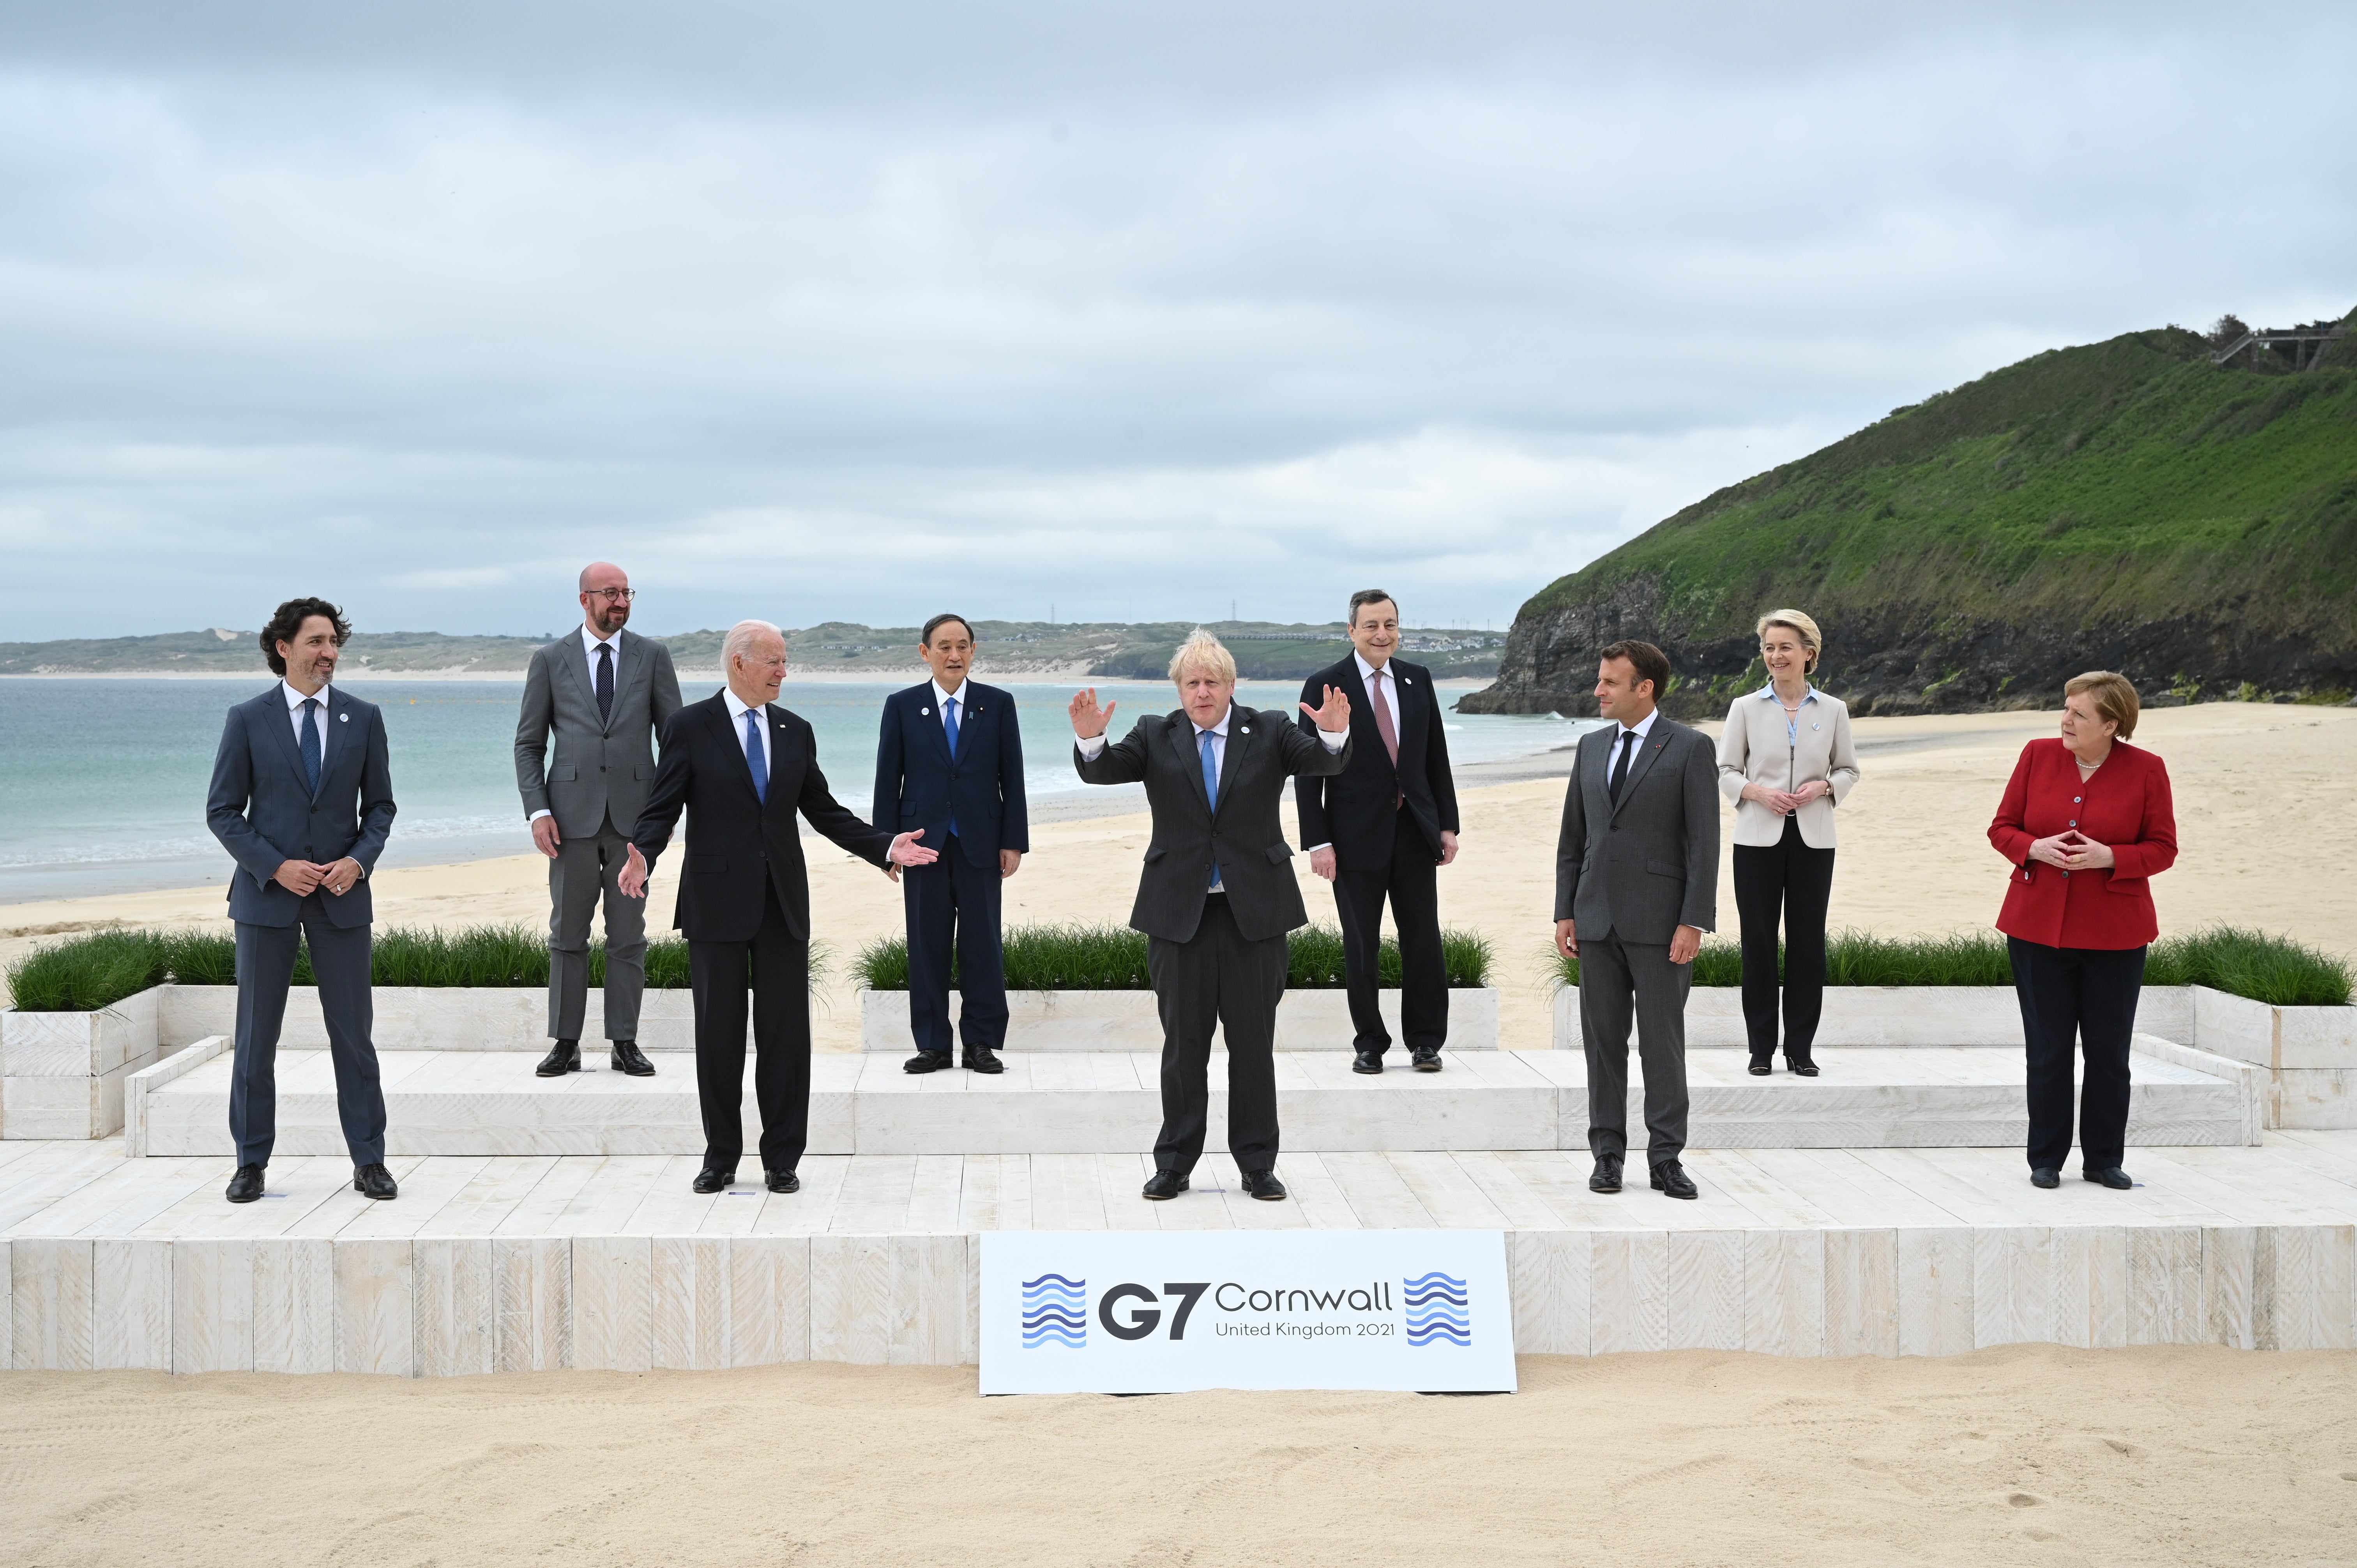 Biden and Merkel attended the G7 summit in Cornwall, UK together in 2021